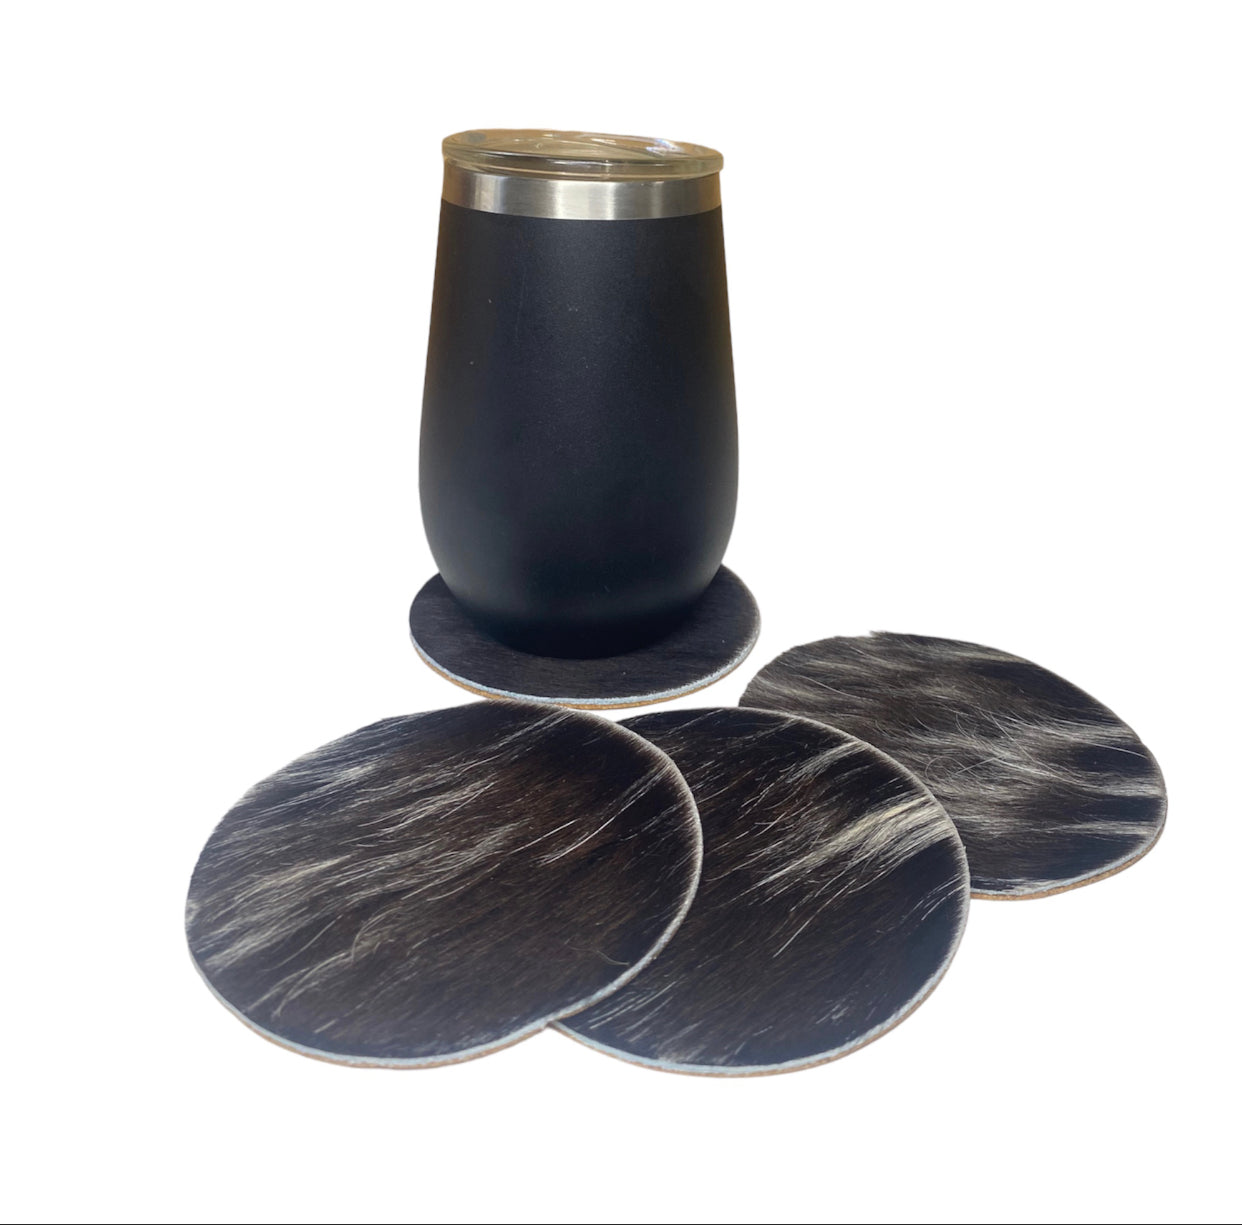 A8388- 100% Hide & Leather Coasters